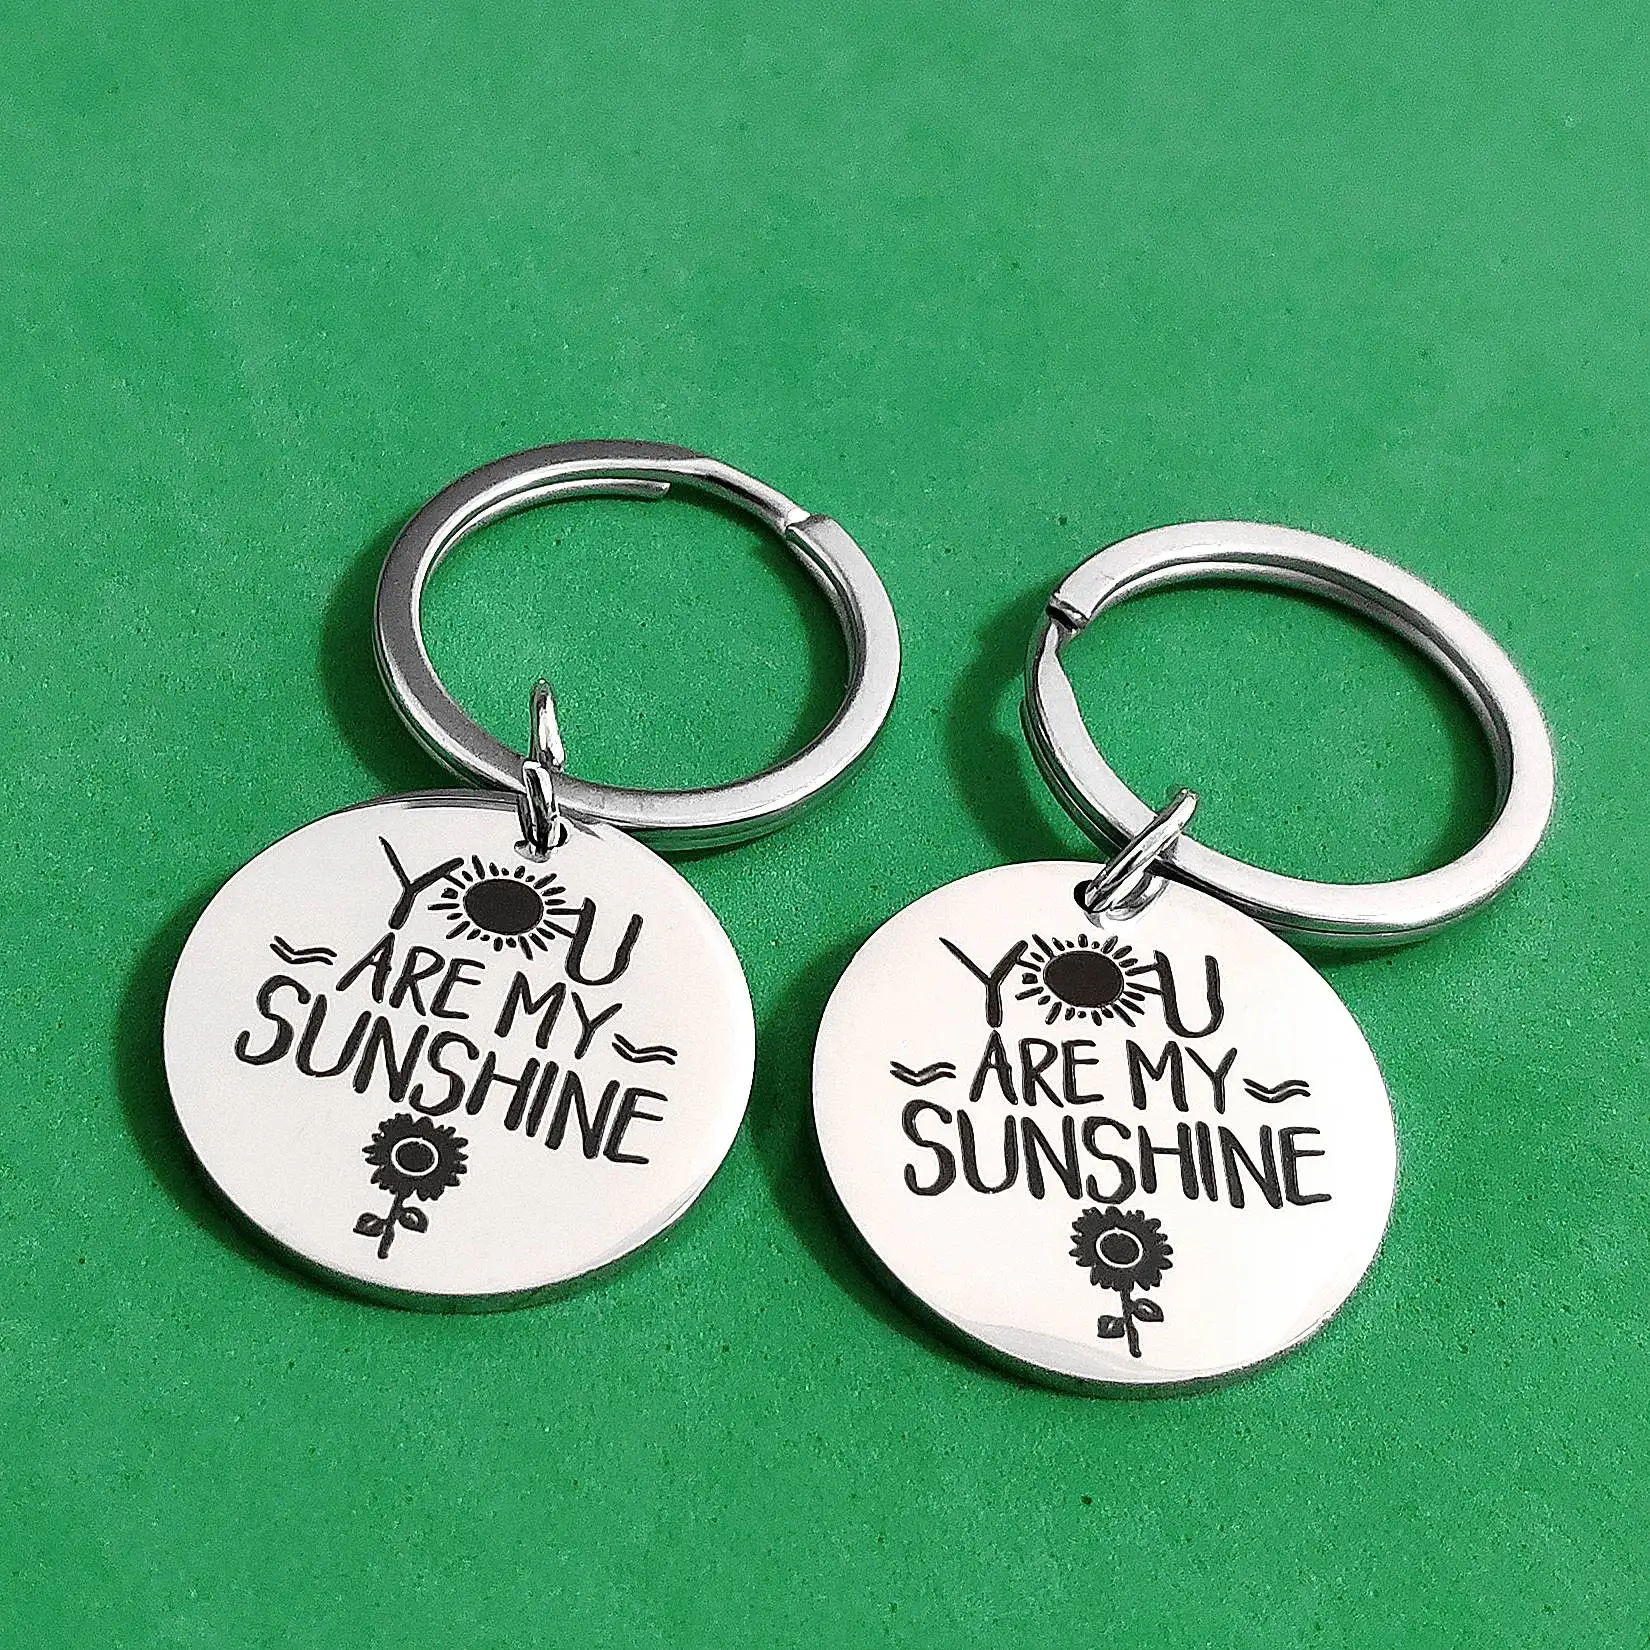 

Keyring Creativity Lanyard for Keys Friends Stainless Steel Gifts Ornaments Couples Sunflowers You Are My Sunshine Keychain Car